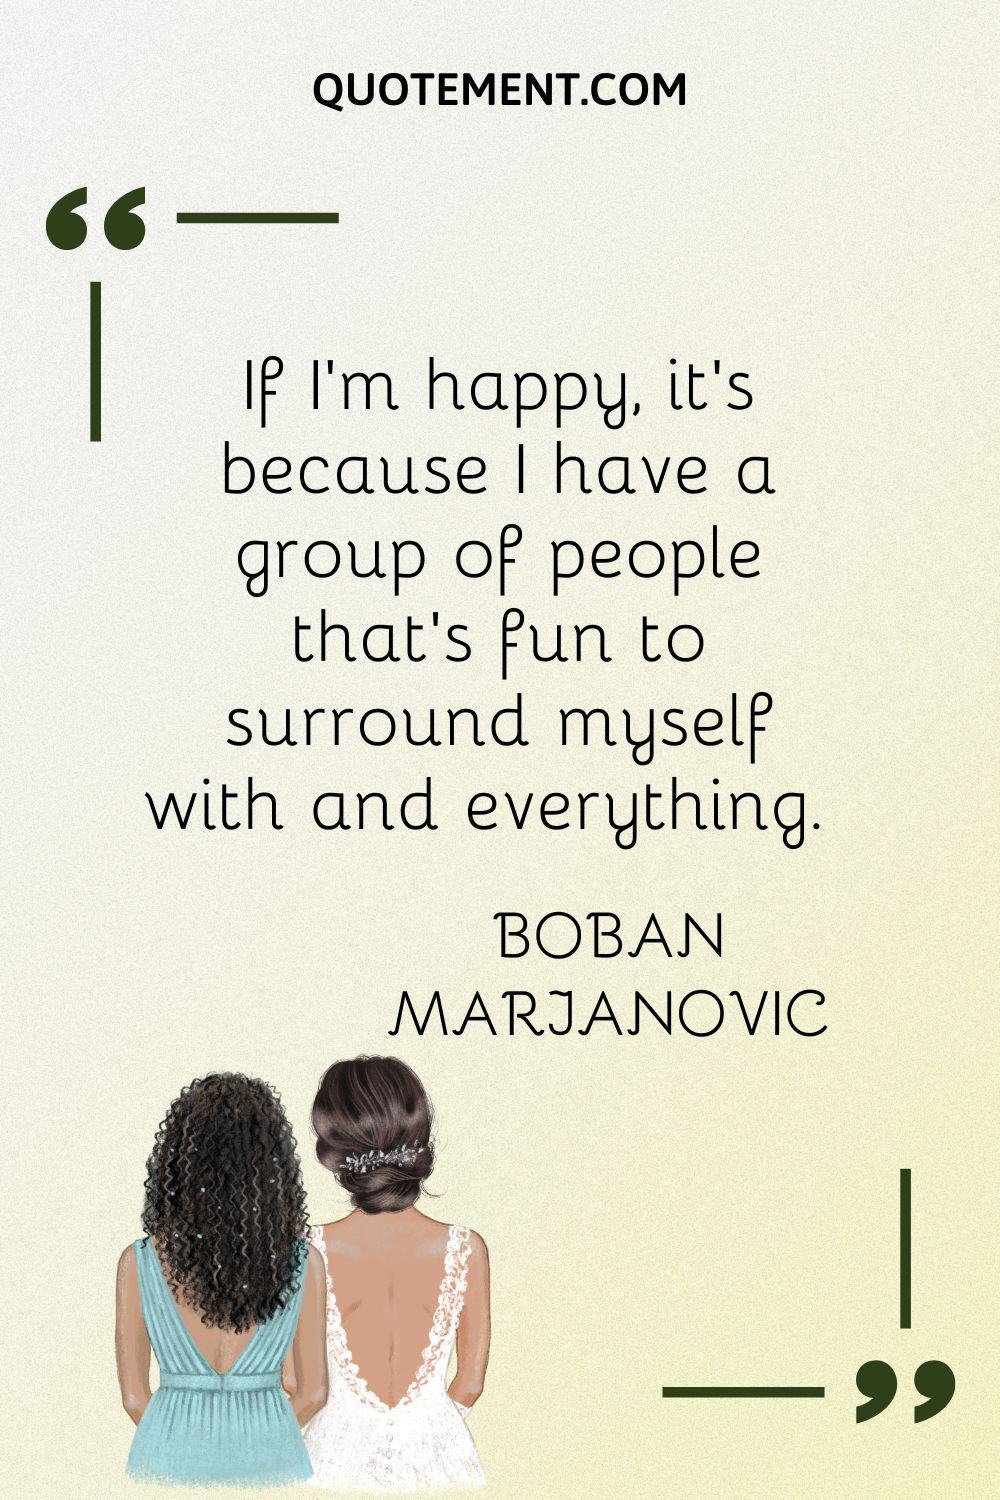 If I'm happy, it's because I have a group of people that's fun to surround myself with and everything